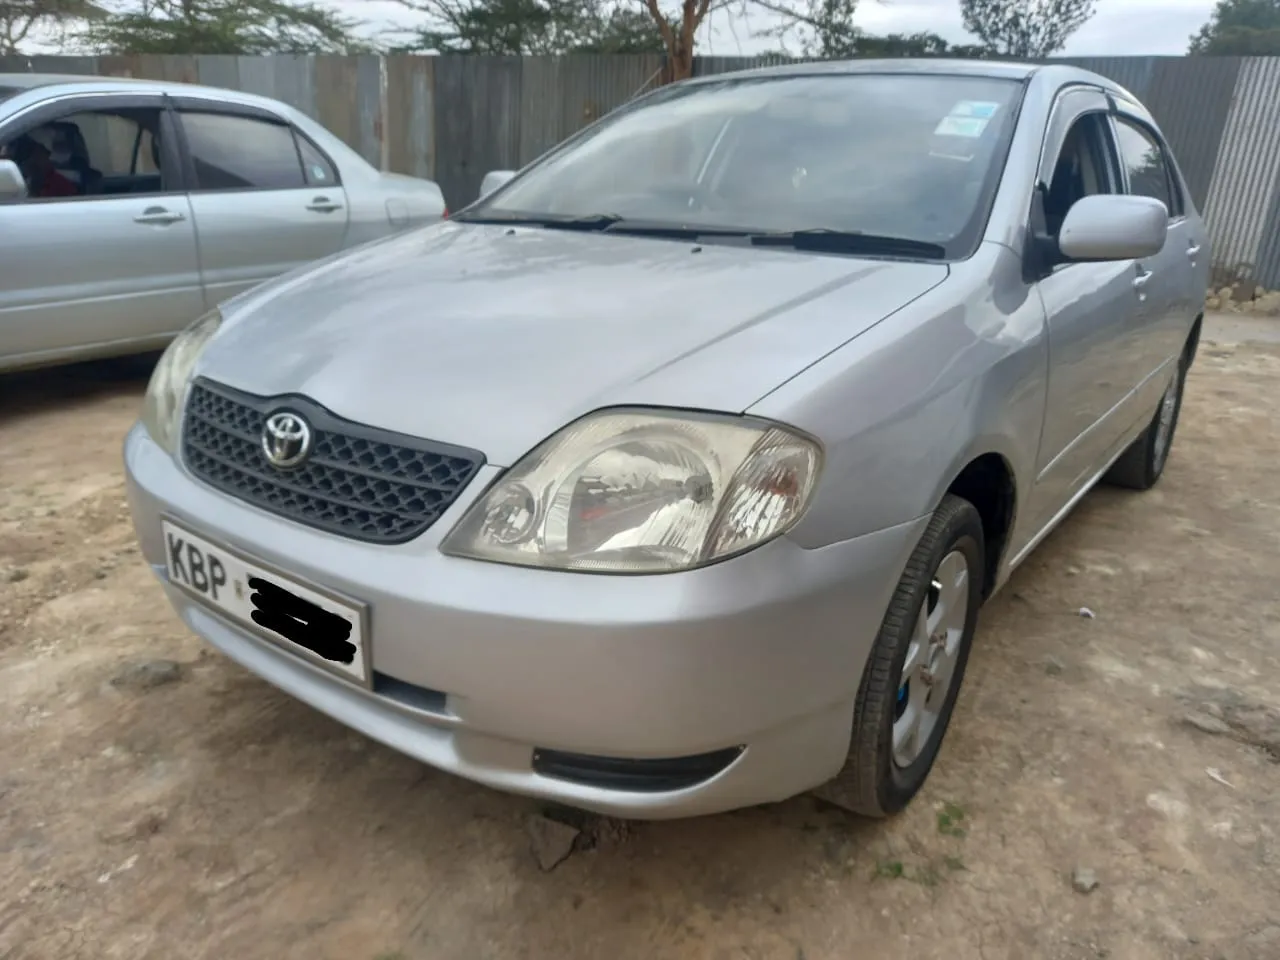 Toyota Corolla NZE for sale in Kenya 🔥 QUICK SALE You Pay 30% Deposit Trade in OK EXCLUSIVE